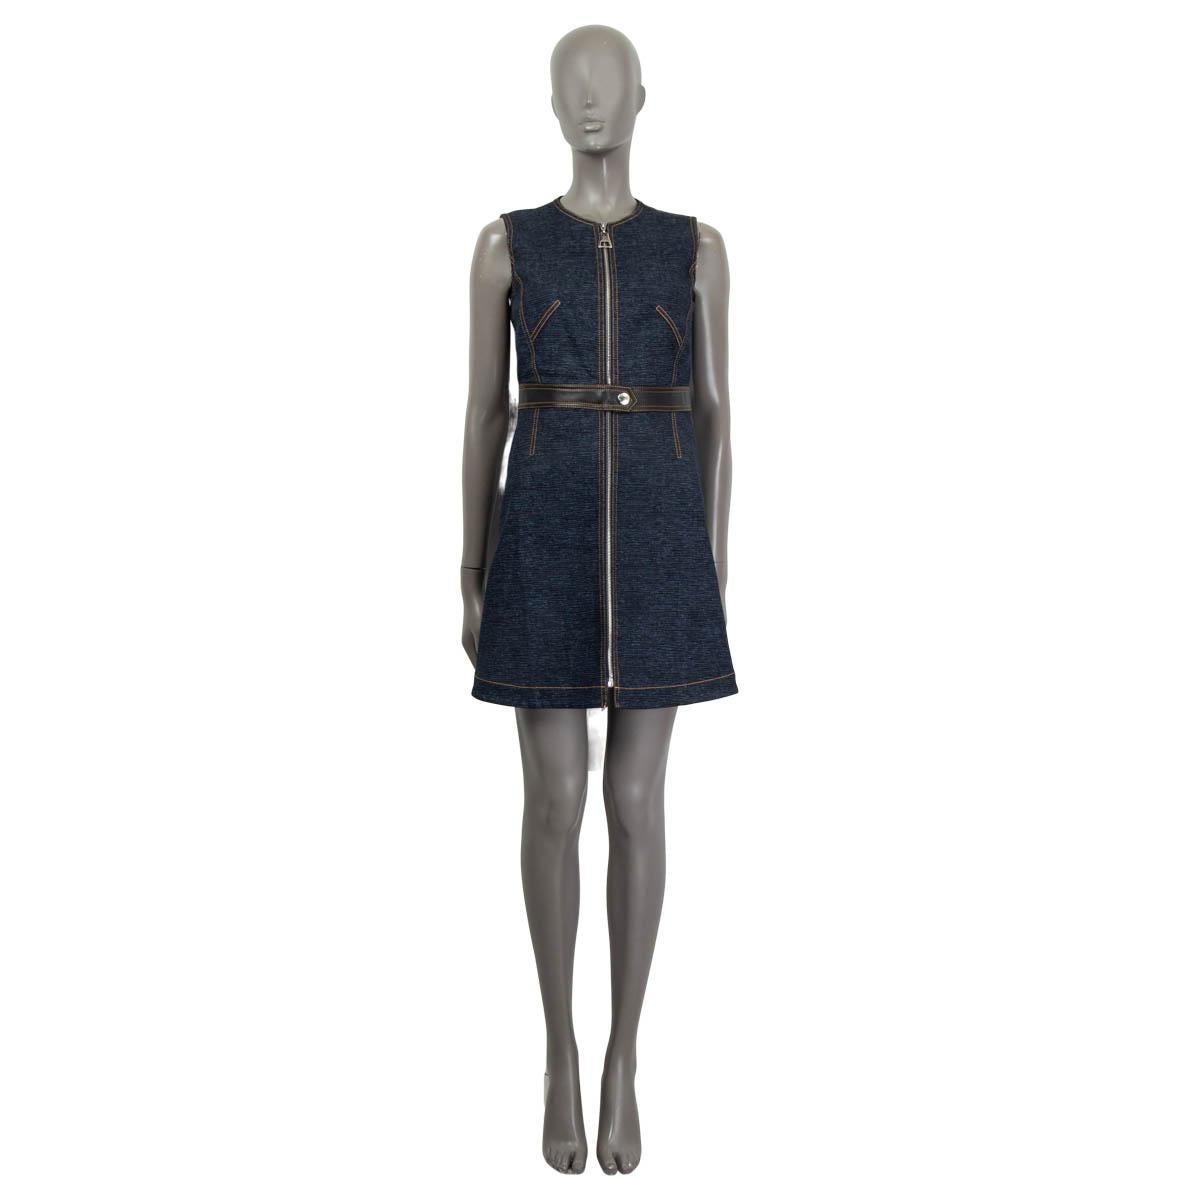 100% authentic Louis Vuitton 2014 sleeveless leather trim denim dress in blue cotton (98%) and elastane (2%). Opens with a zipper and a button on the front. Unlined. Has been worn and is in excellent condition.

Measurements
Tag